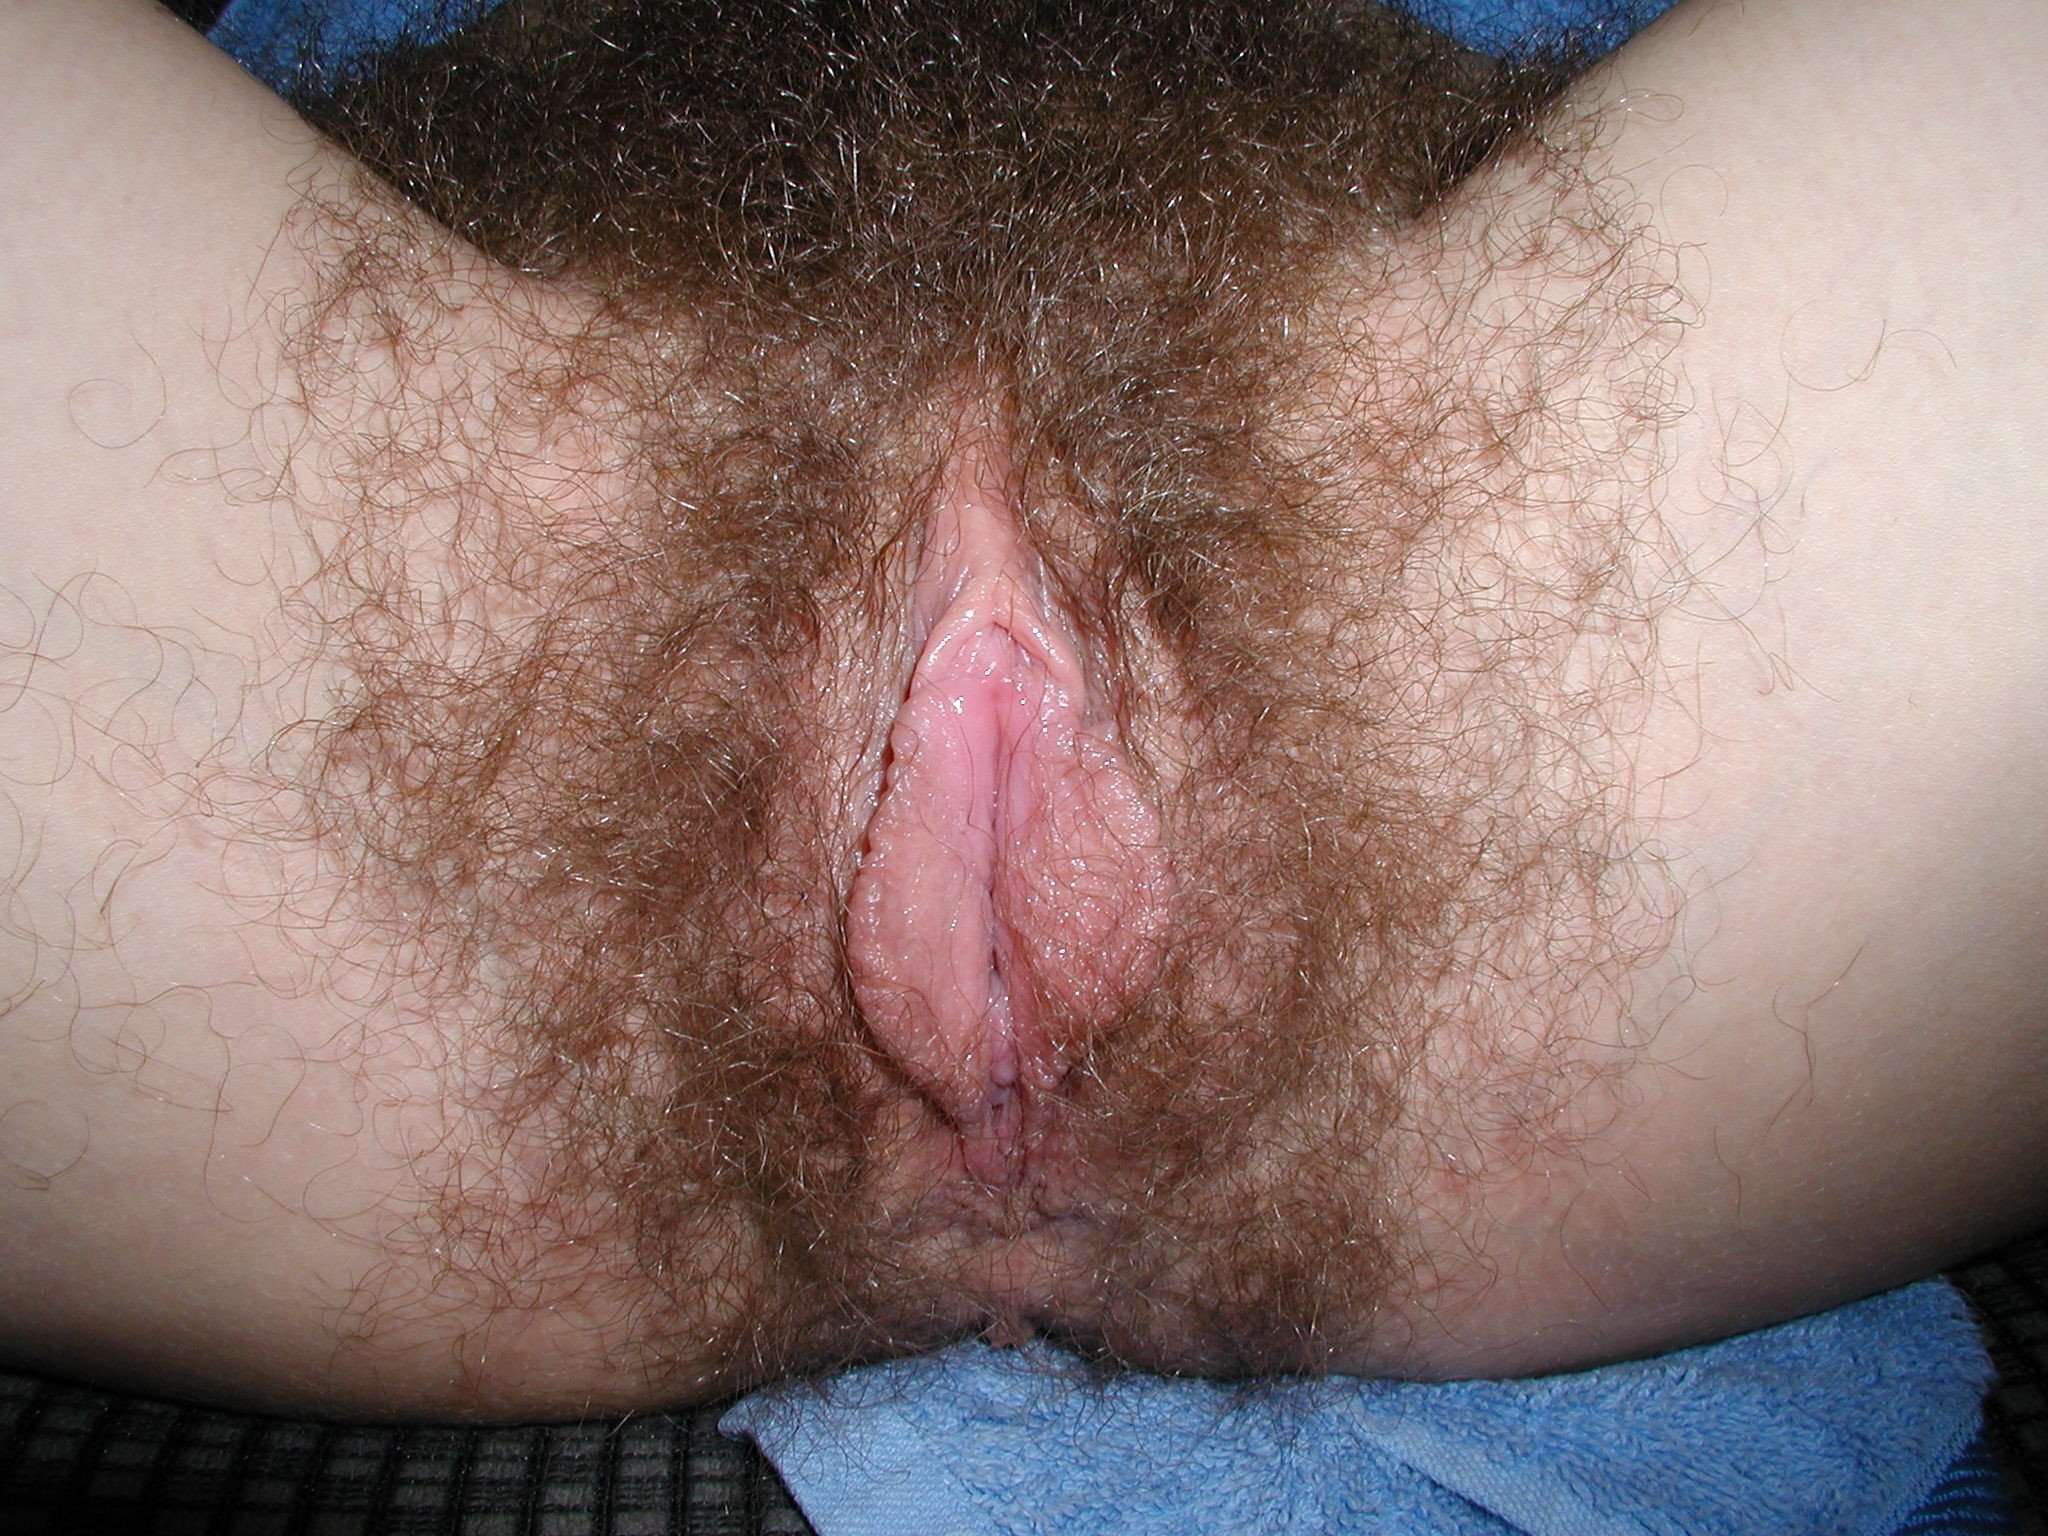 Hairy Extremely High Quality Videos Up